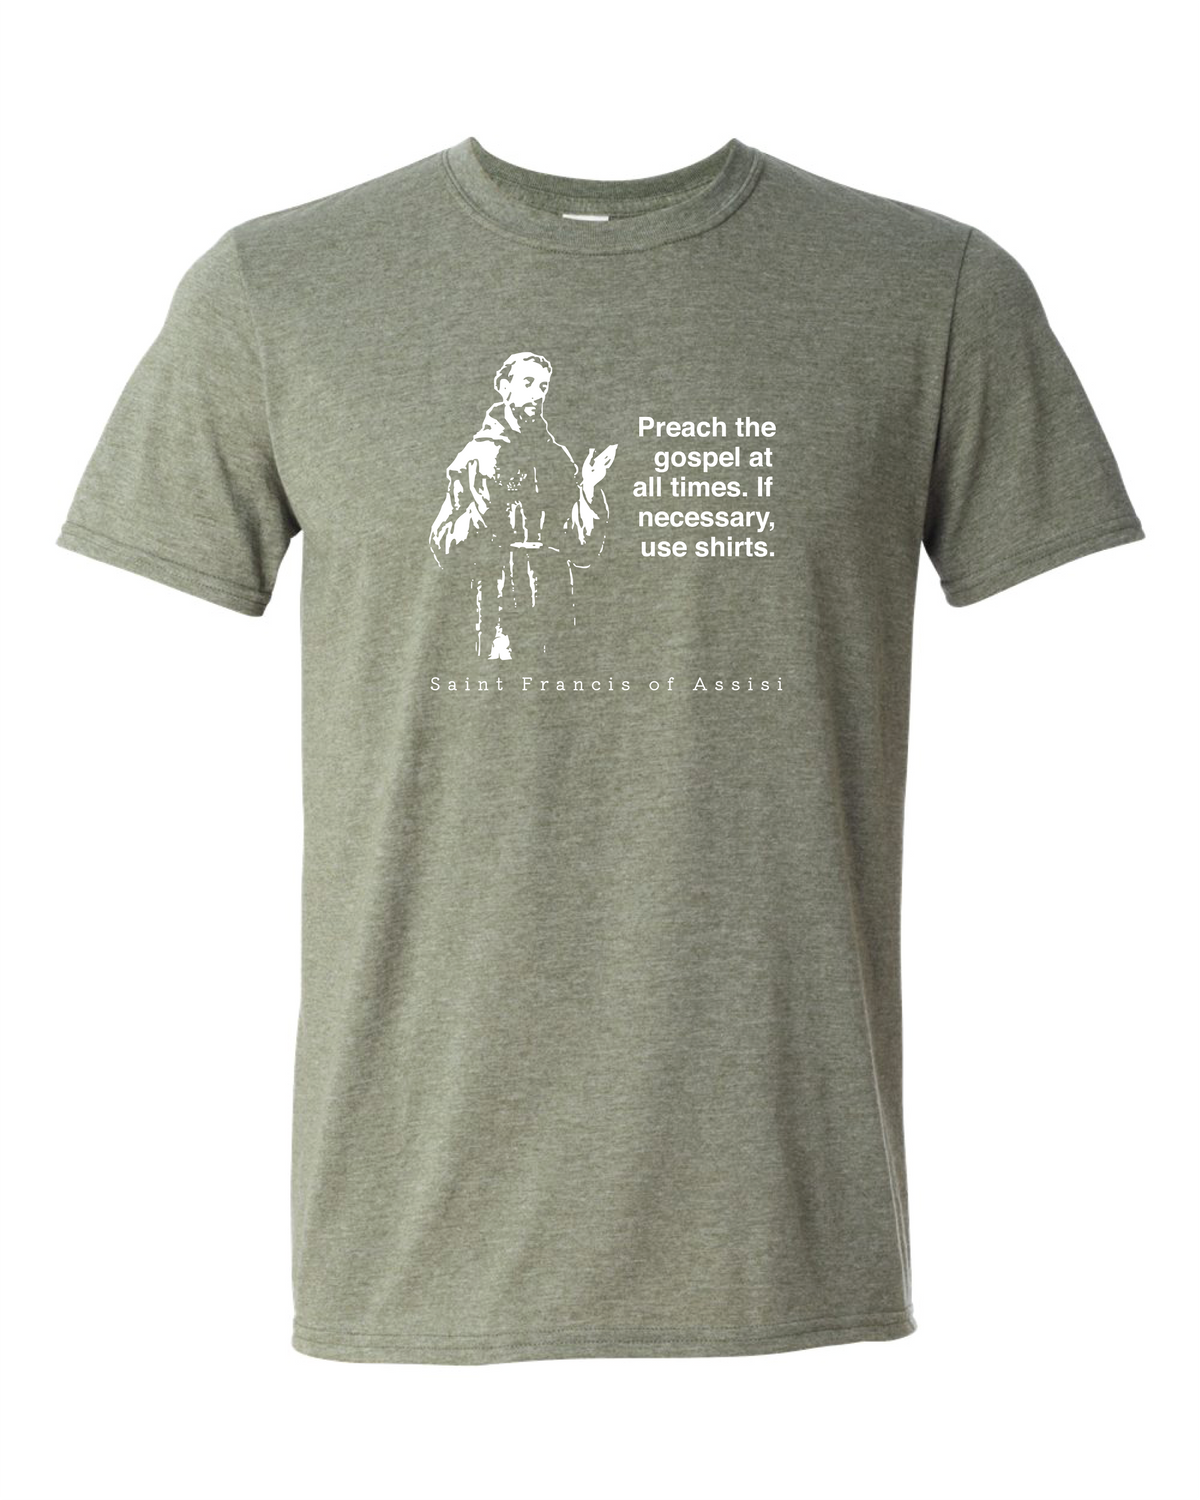 Preach the Gospel - St. Francis of Assisi T Shirt